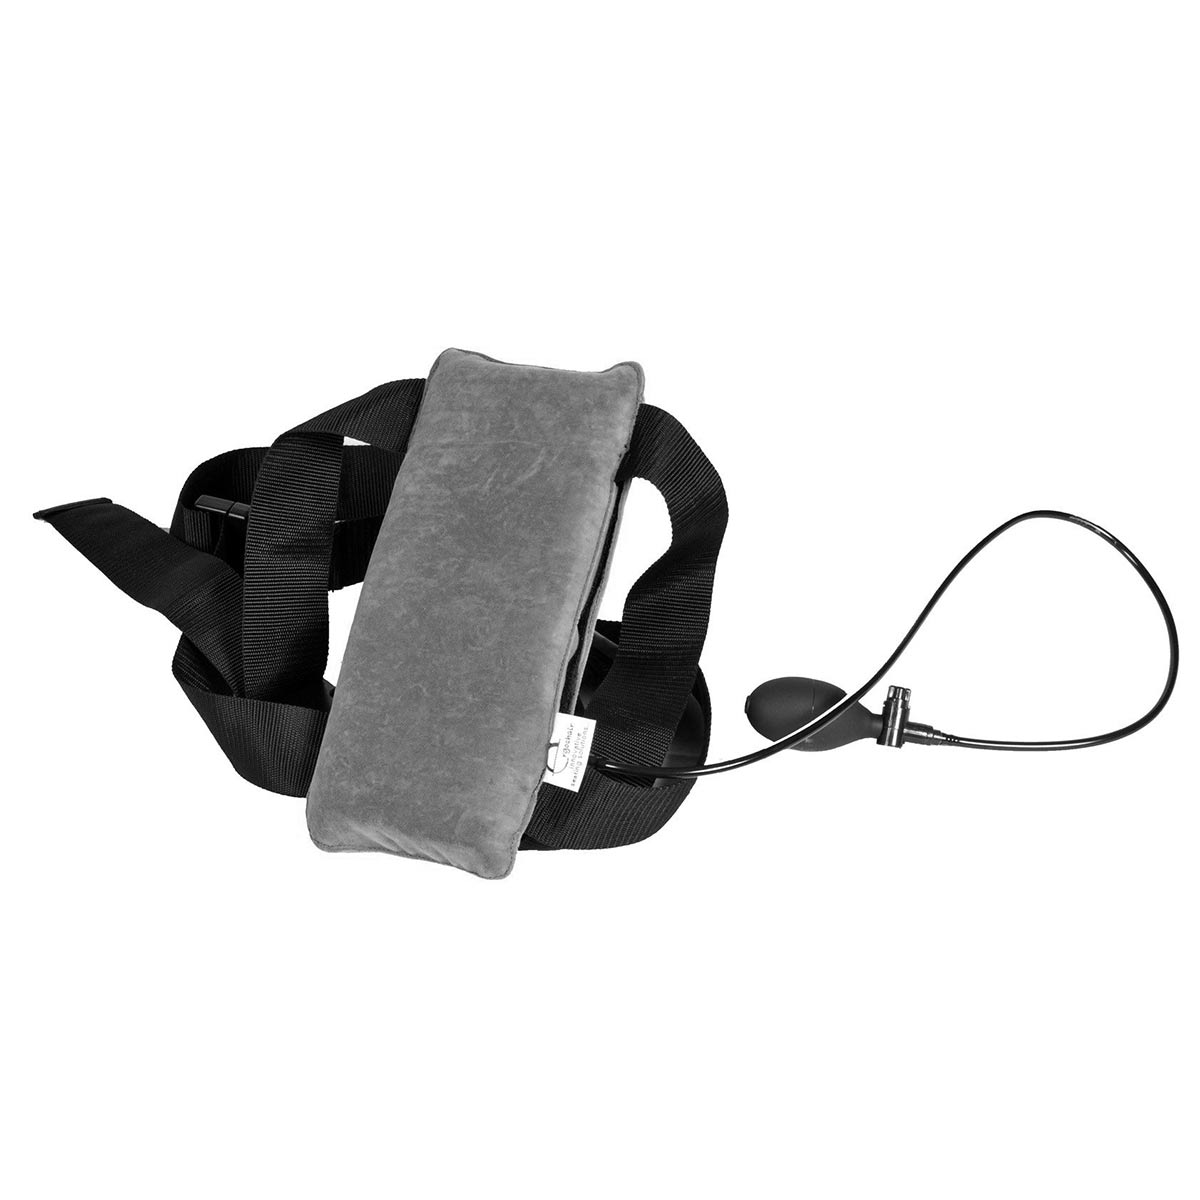 Actyv Portable Lumbar Support - Vertical